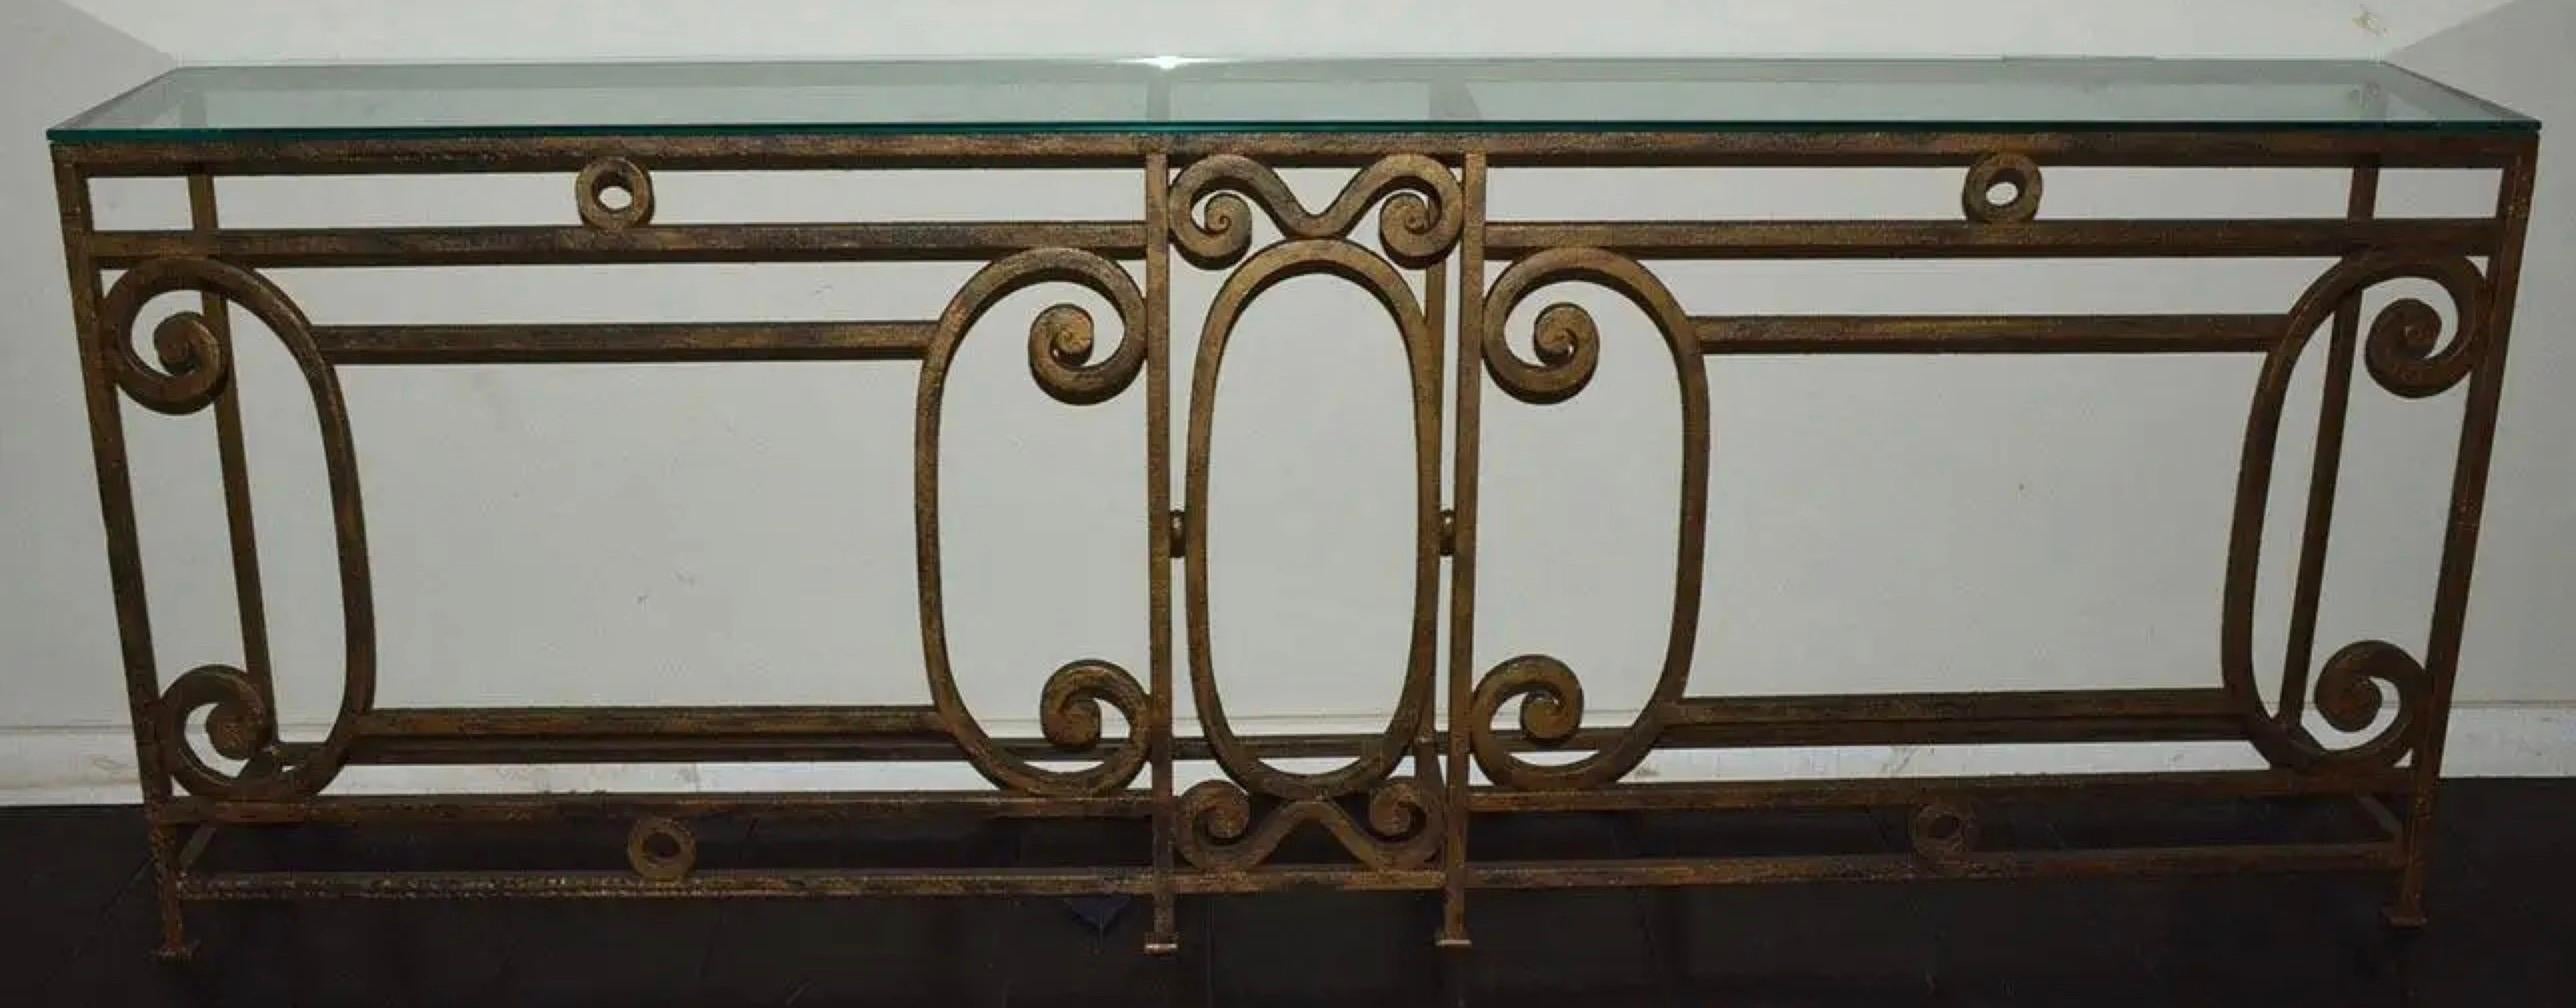 The long baroque style metal console or sofa table has a brushed gold gilt finish and is handcrafted with elegant scroll-work and detailing. The feet have flat iron pads. The console is newly made from antique fencing. We have additional stock and